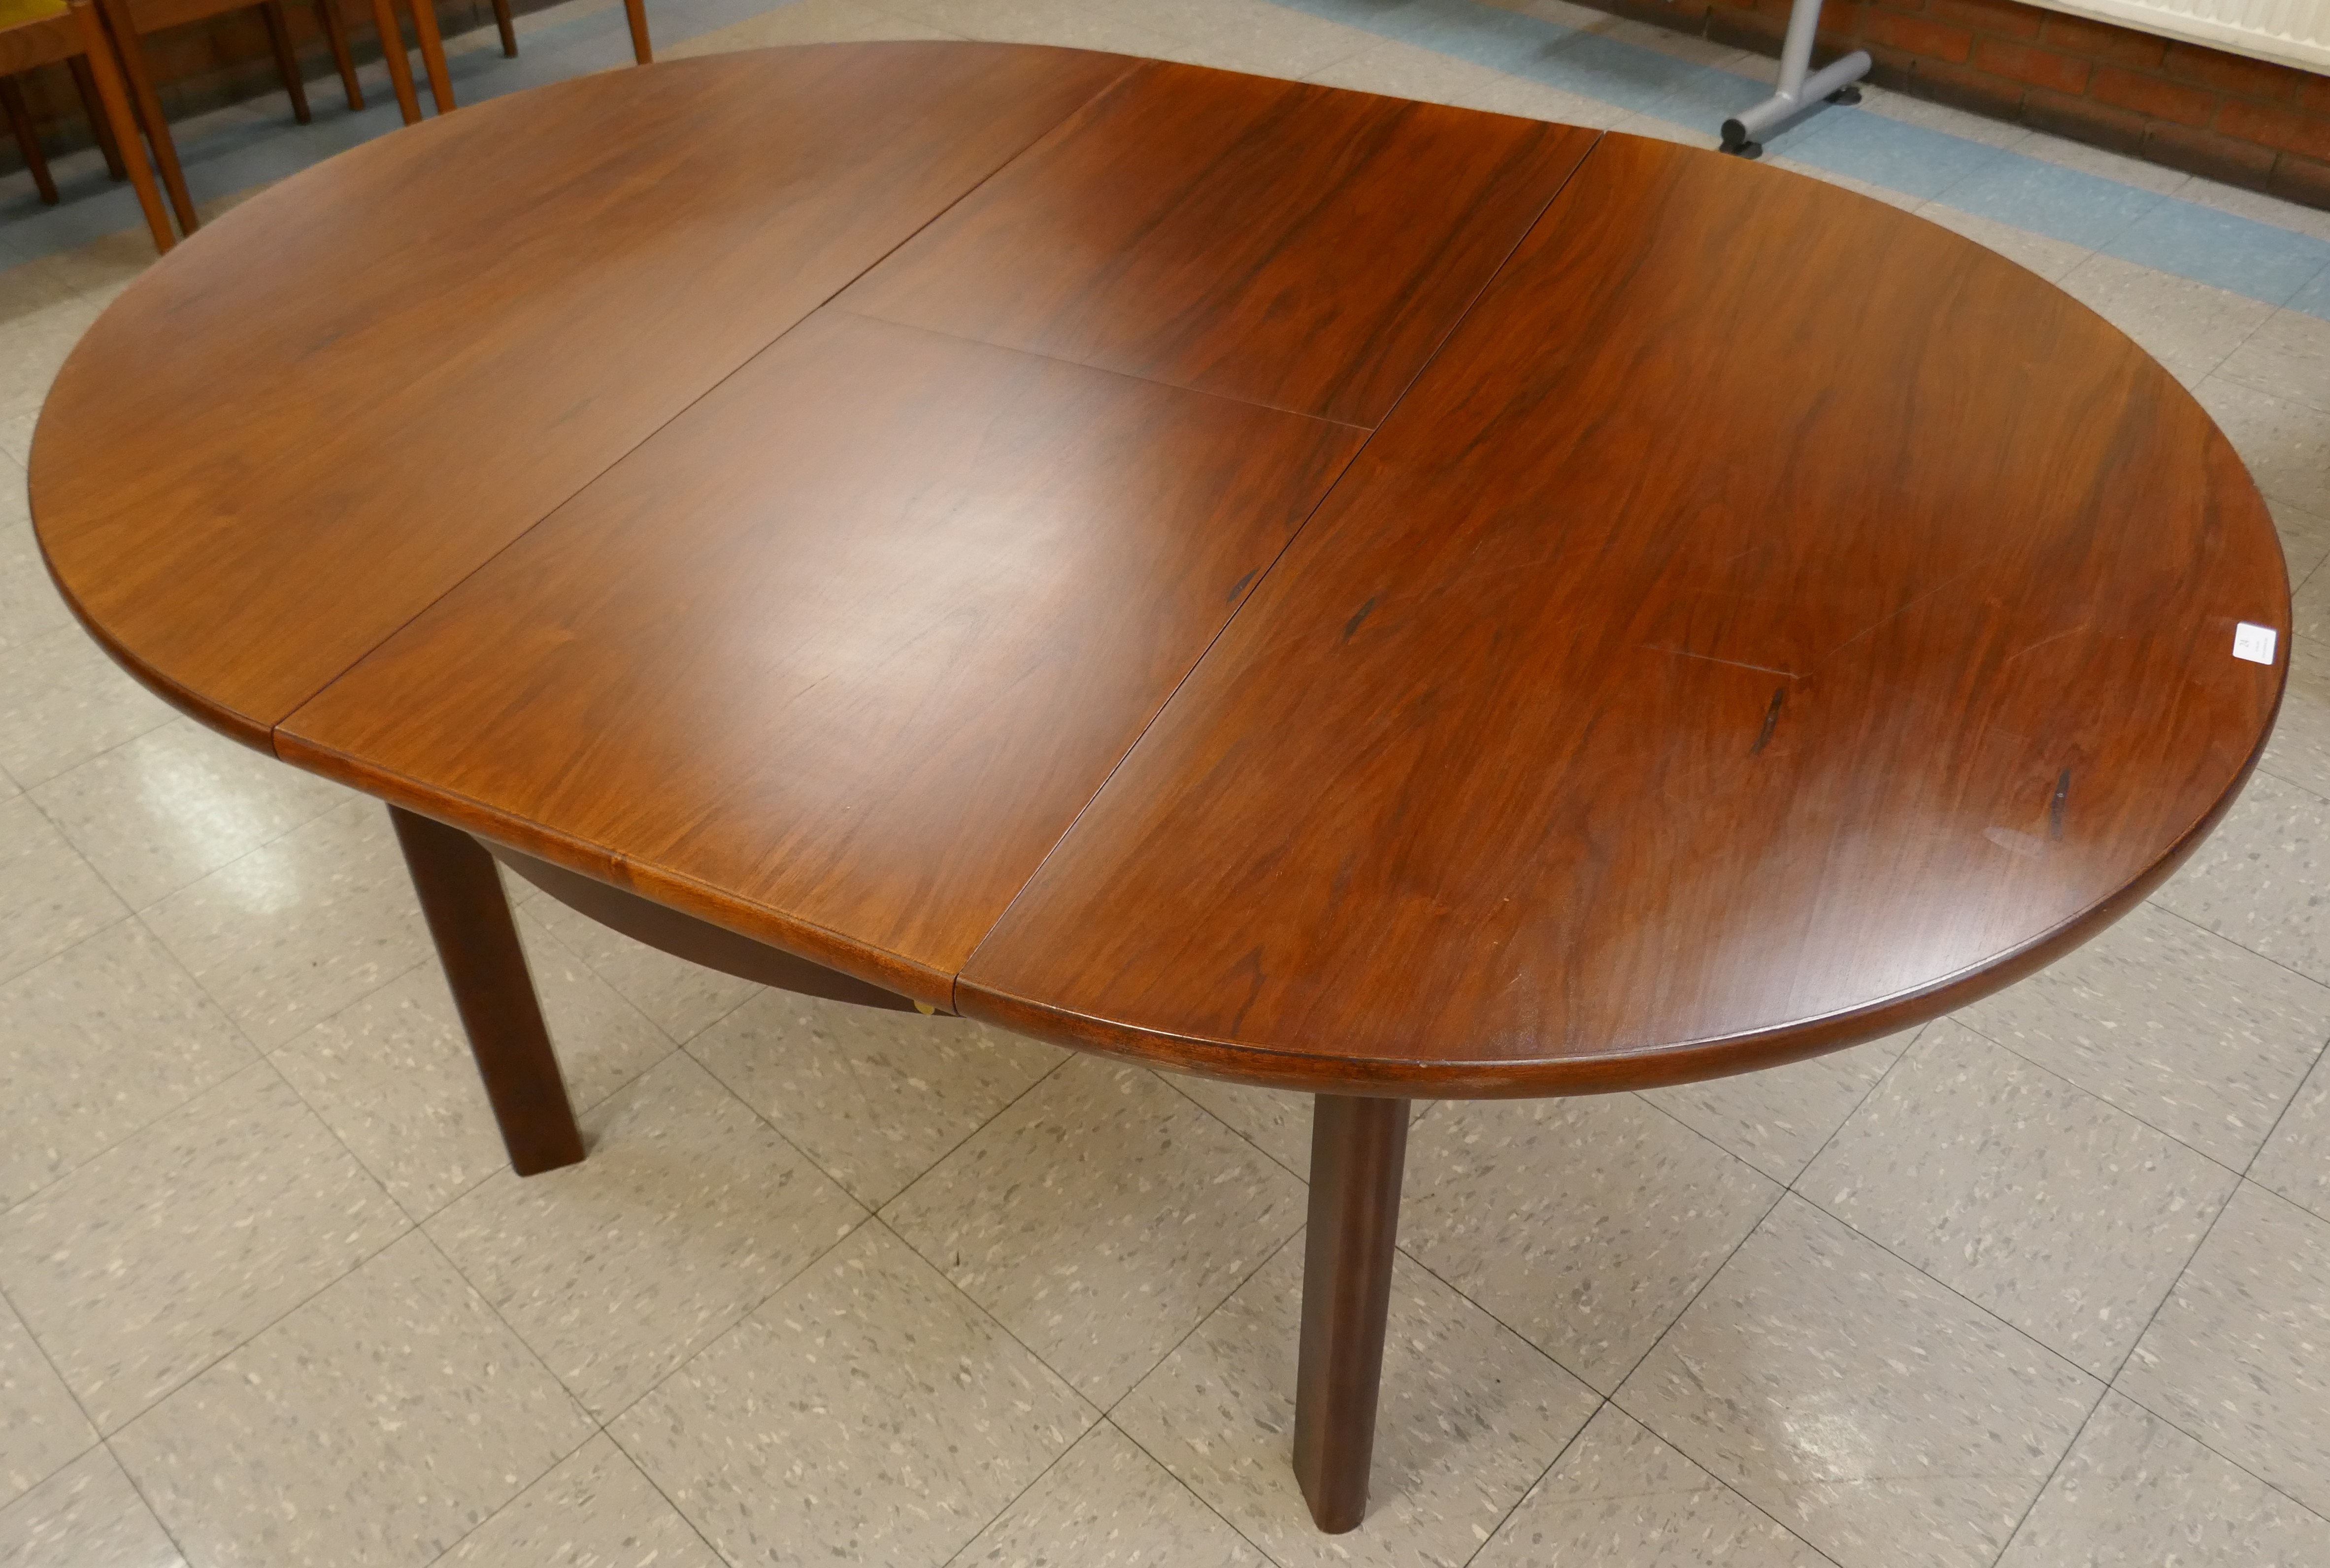 A Danish rosewood circular extending dining table. CITES A10 no. 24GBA10V19RFP - Image 3 of 4